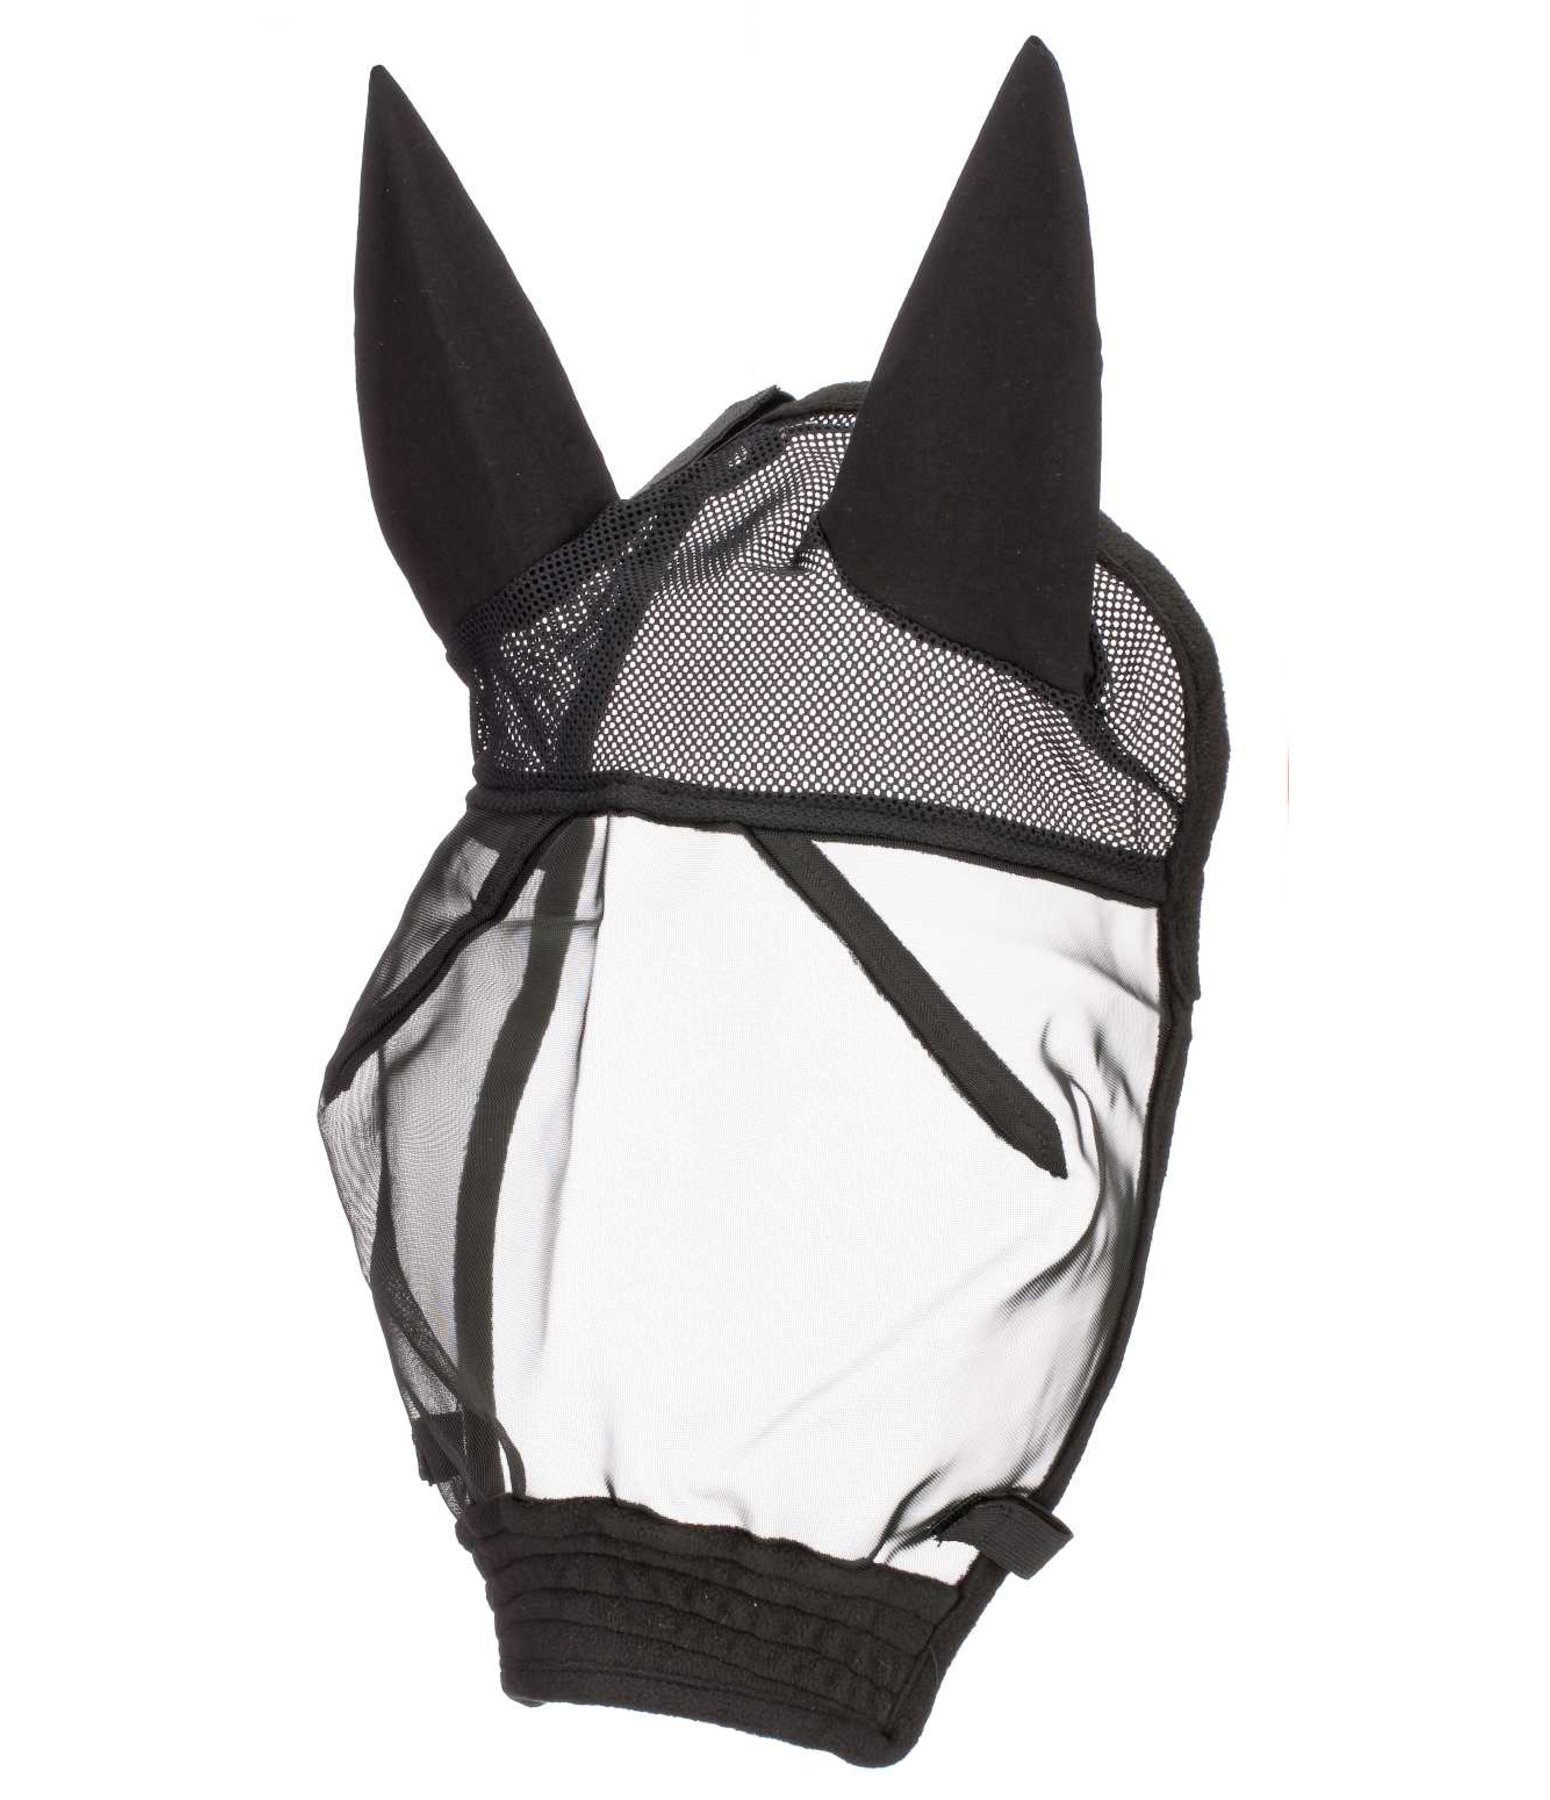 Fly Mask for Riding Free-Ride